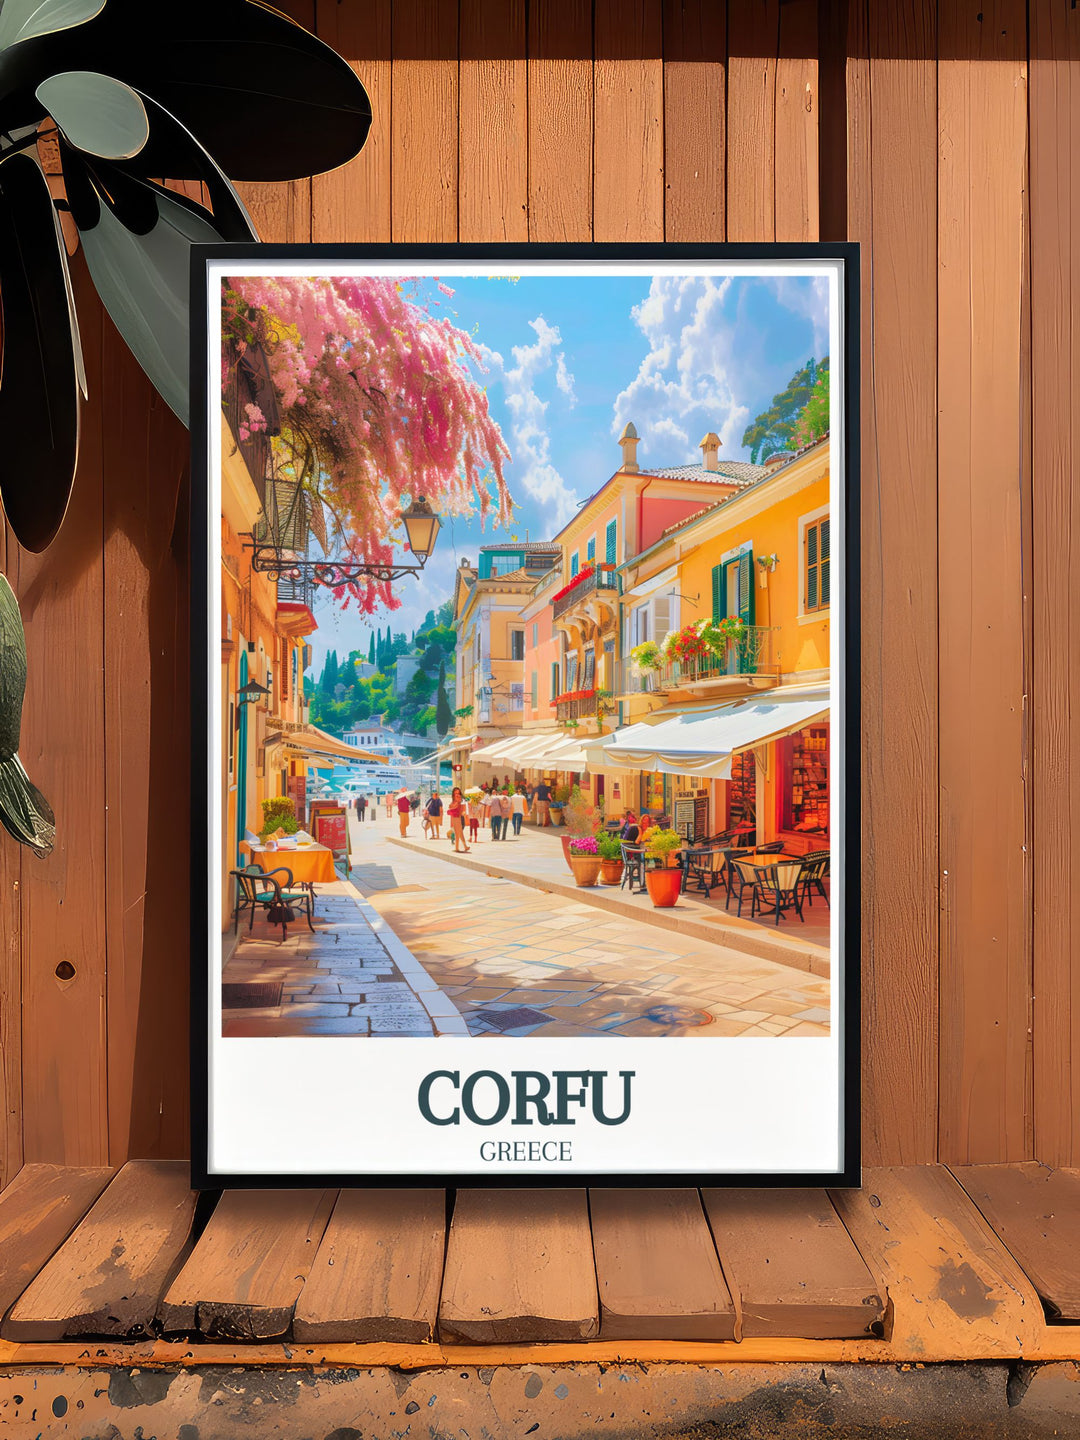 Vivid Corfu travel art featuring Old Town Corfu Liston Promenade a captivating piece that transports viewers to the serene streets of Corfu Greece Island perfect for home decor or as a special gift for those who cherish Mediterranean landscapes and Greek culture